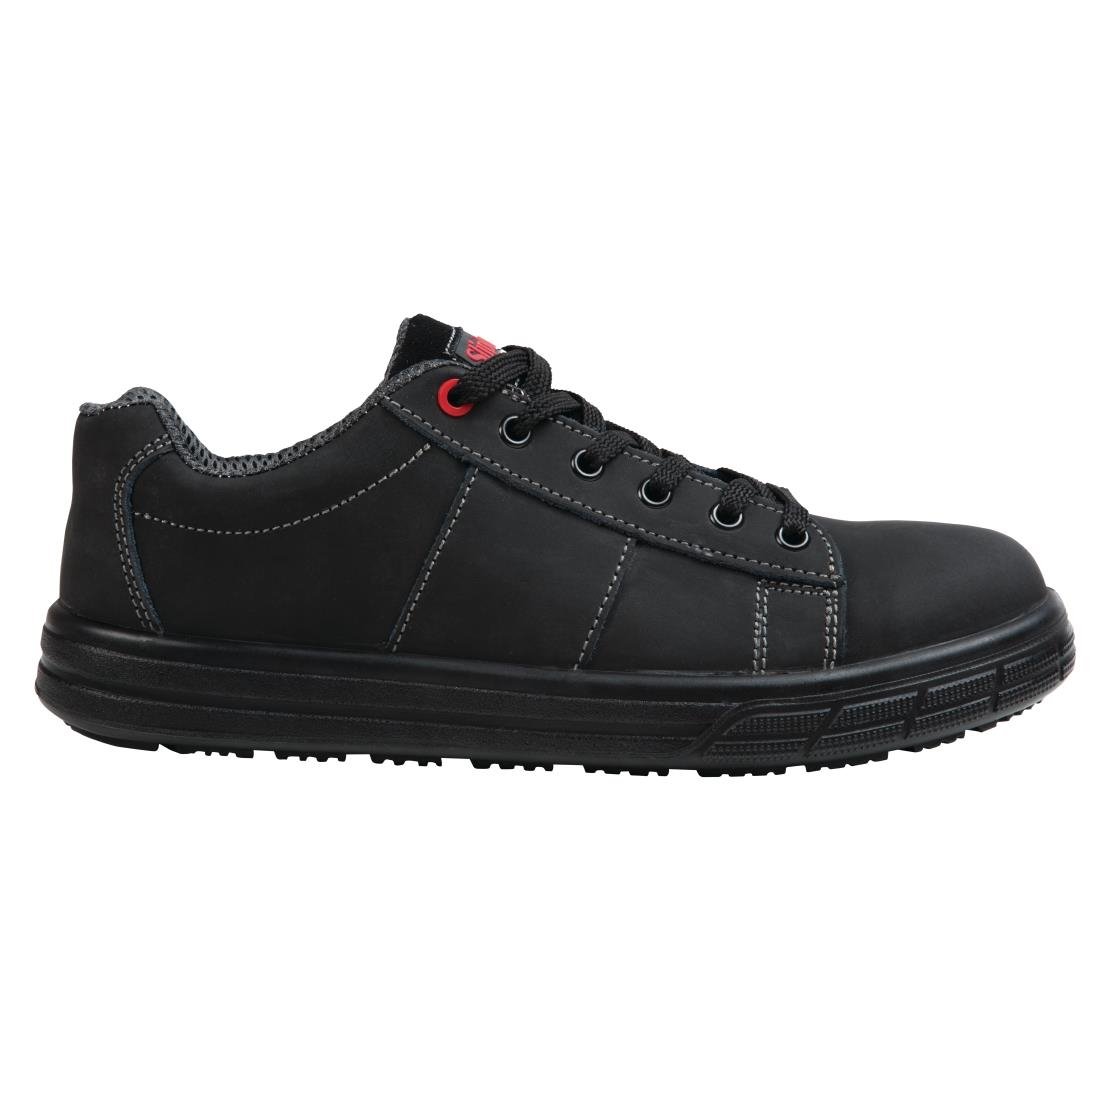 BB420-44 Slipbuster Safety Trainers Black 44